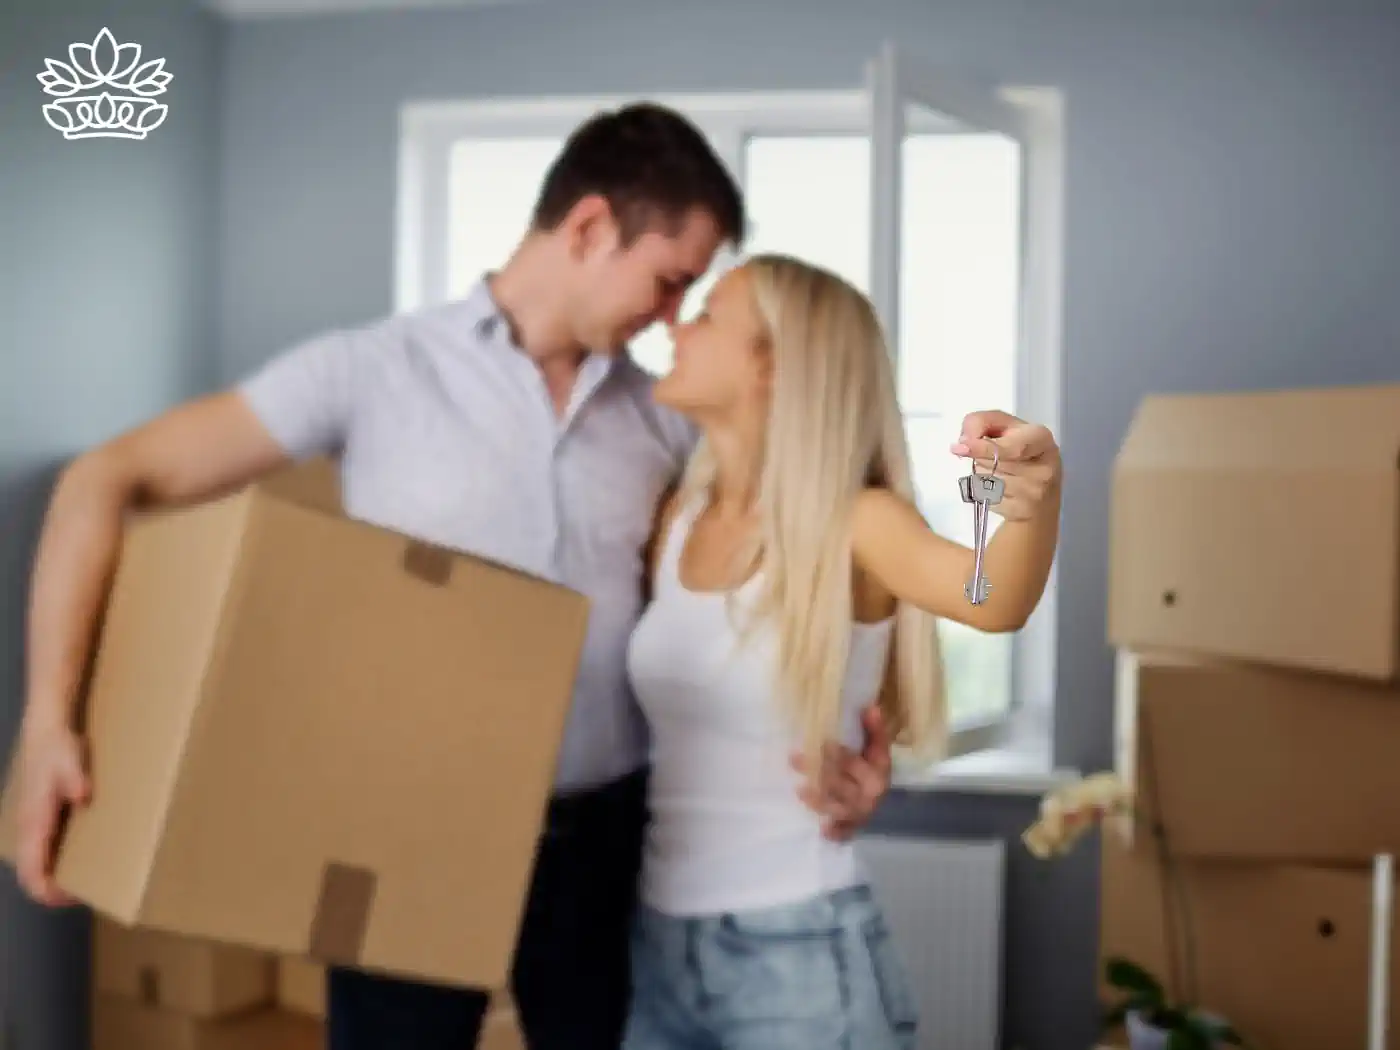 Loving couple embracing in their new home, holding a key and a moving box, celebrating a fresh start. Fabulous Flowers and Gifts - Housewarming. Delivered with Heart.